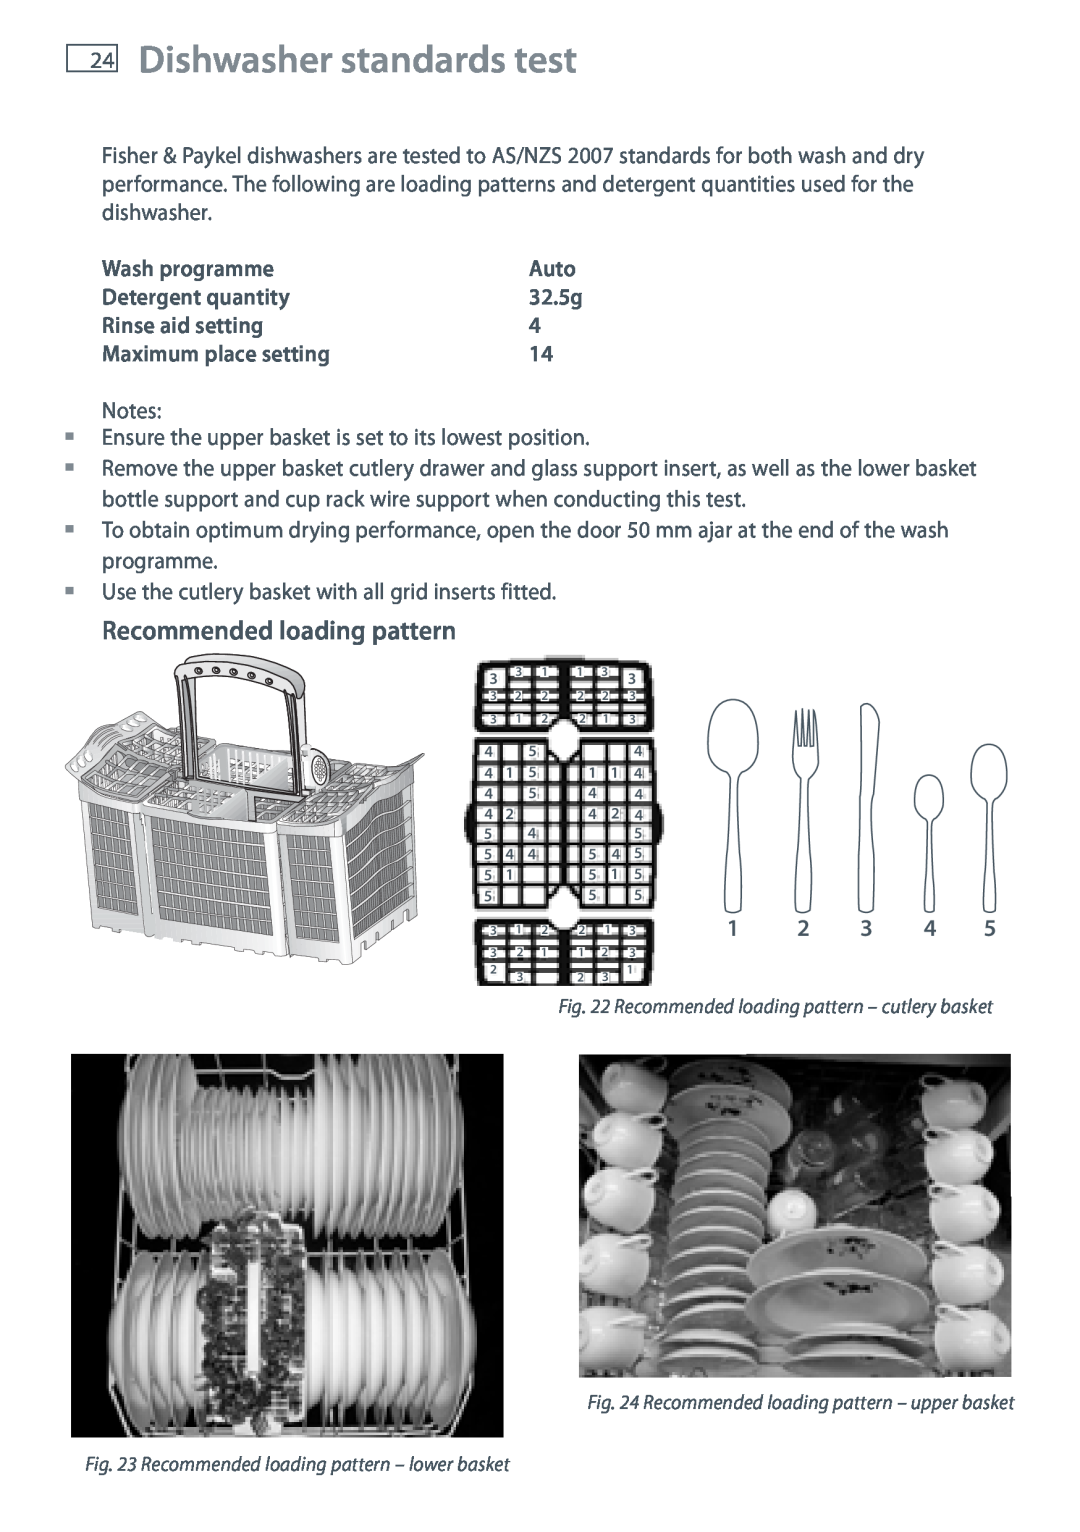 Fisher & Paykel DW60DOX Dishwasher standards test, Recommended loading pattern, Wash programme, Auto, Detergent quantity 